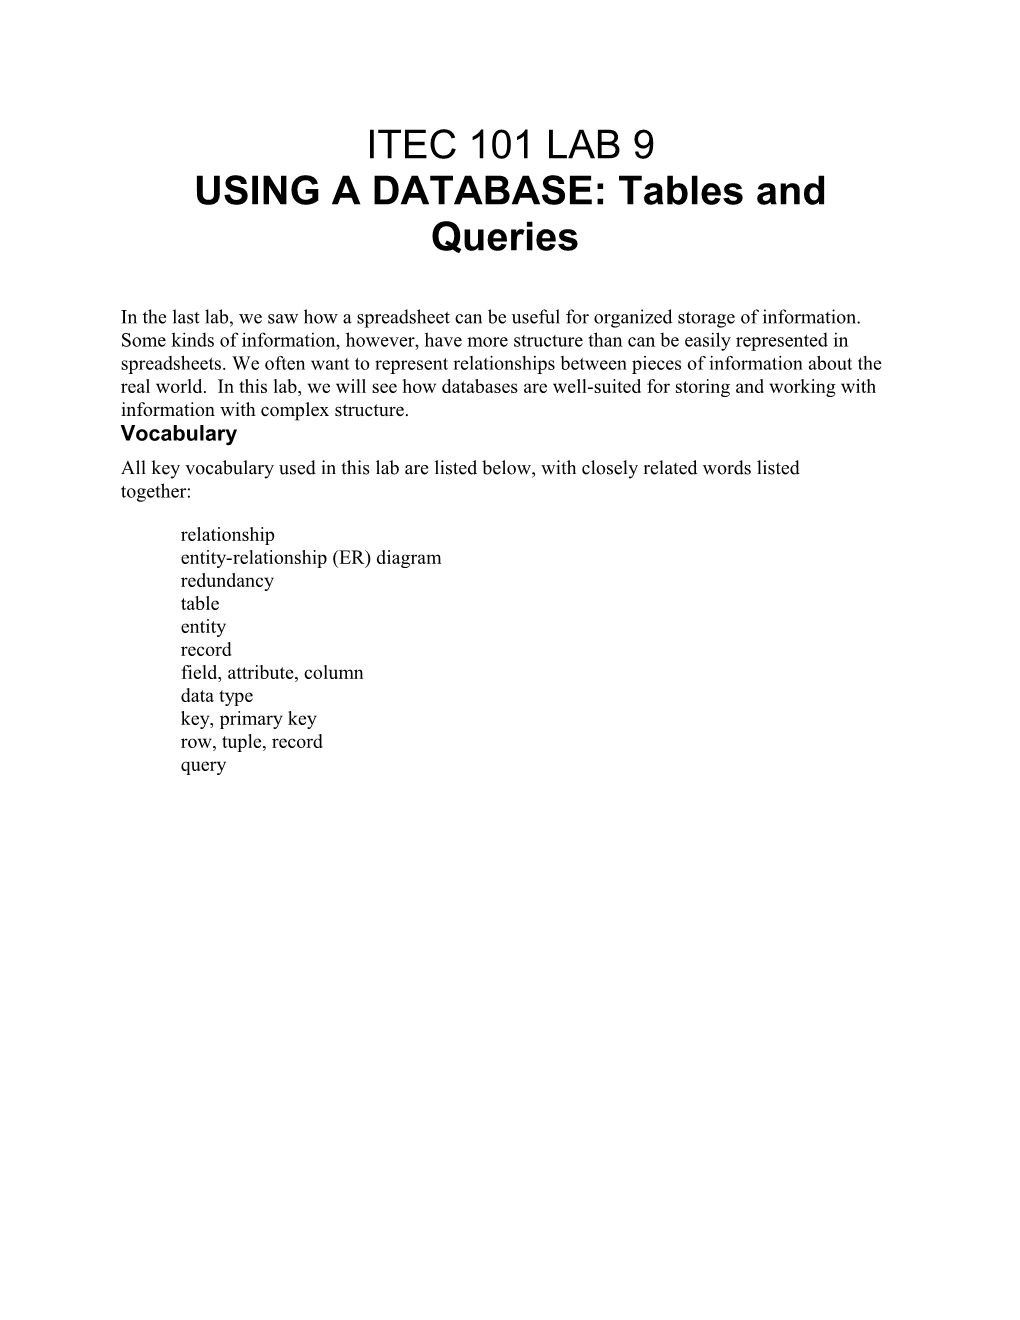 ITEC 101 LAB 9 USING a DATABASE: Tables and Queries